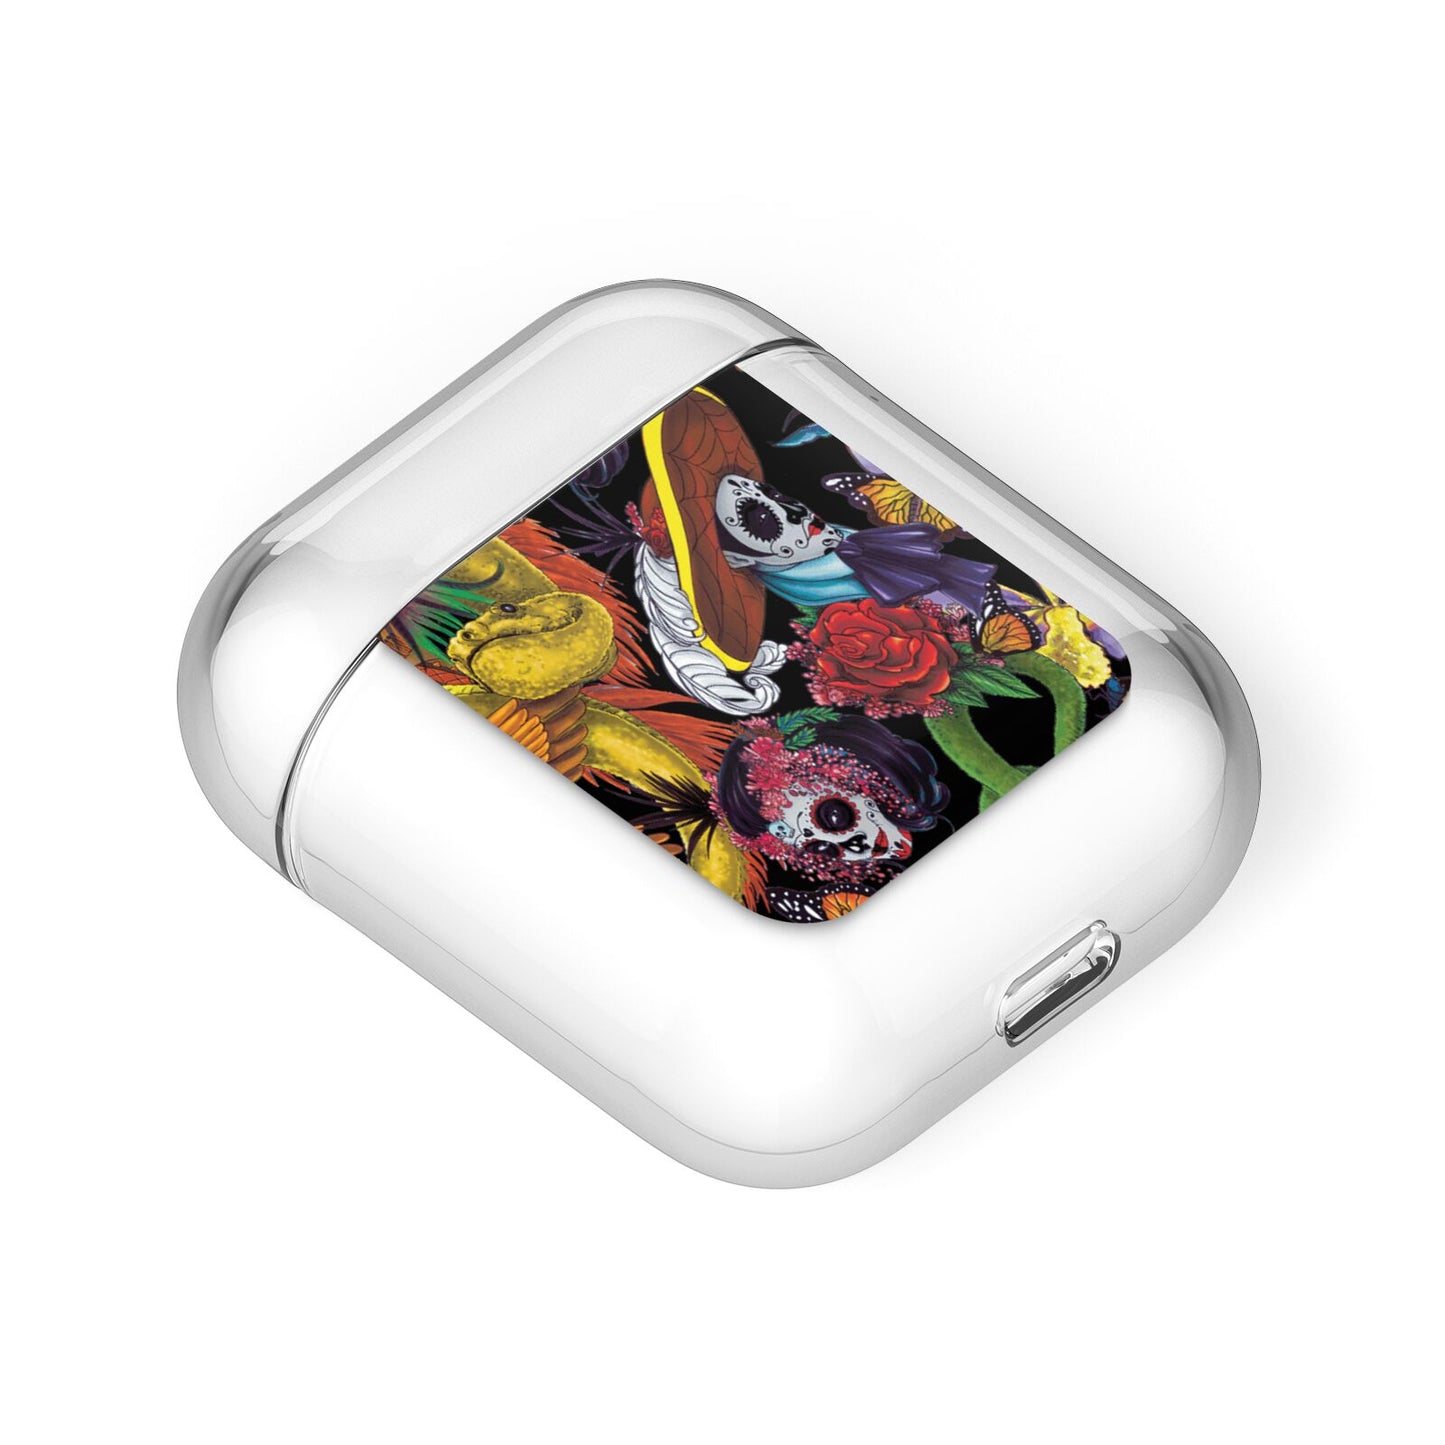 Day of the Dead AirPods Case Laid Flat